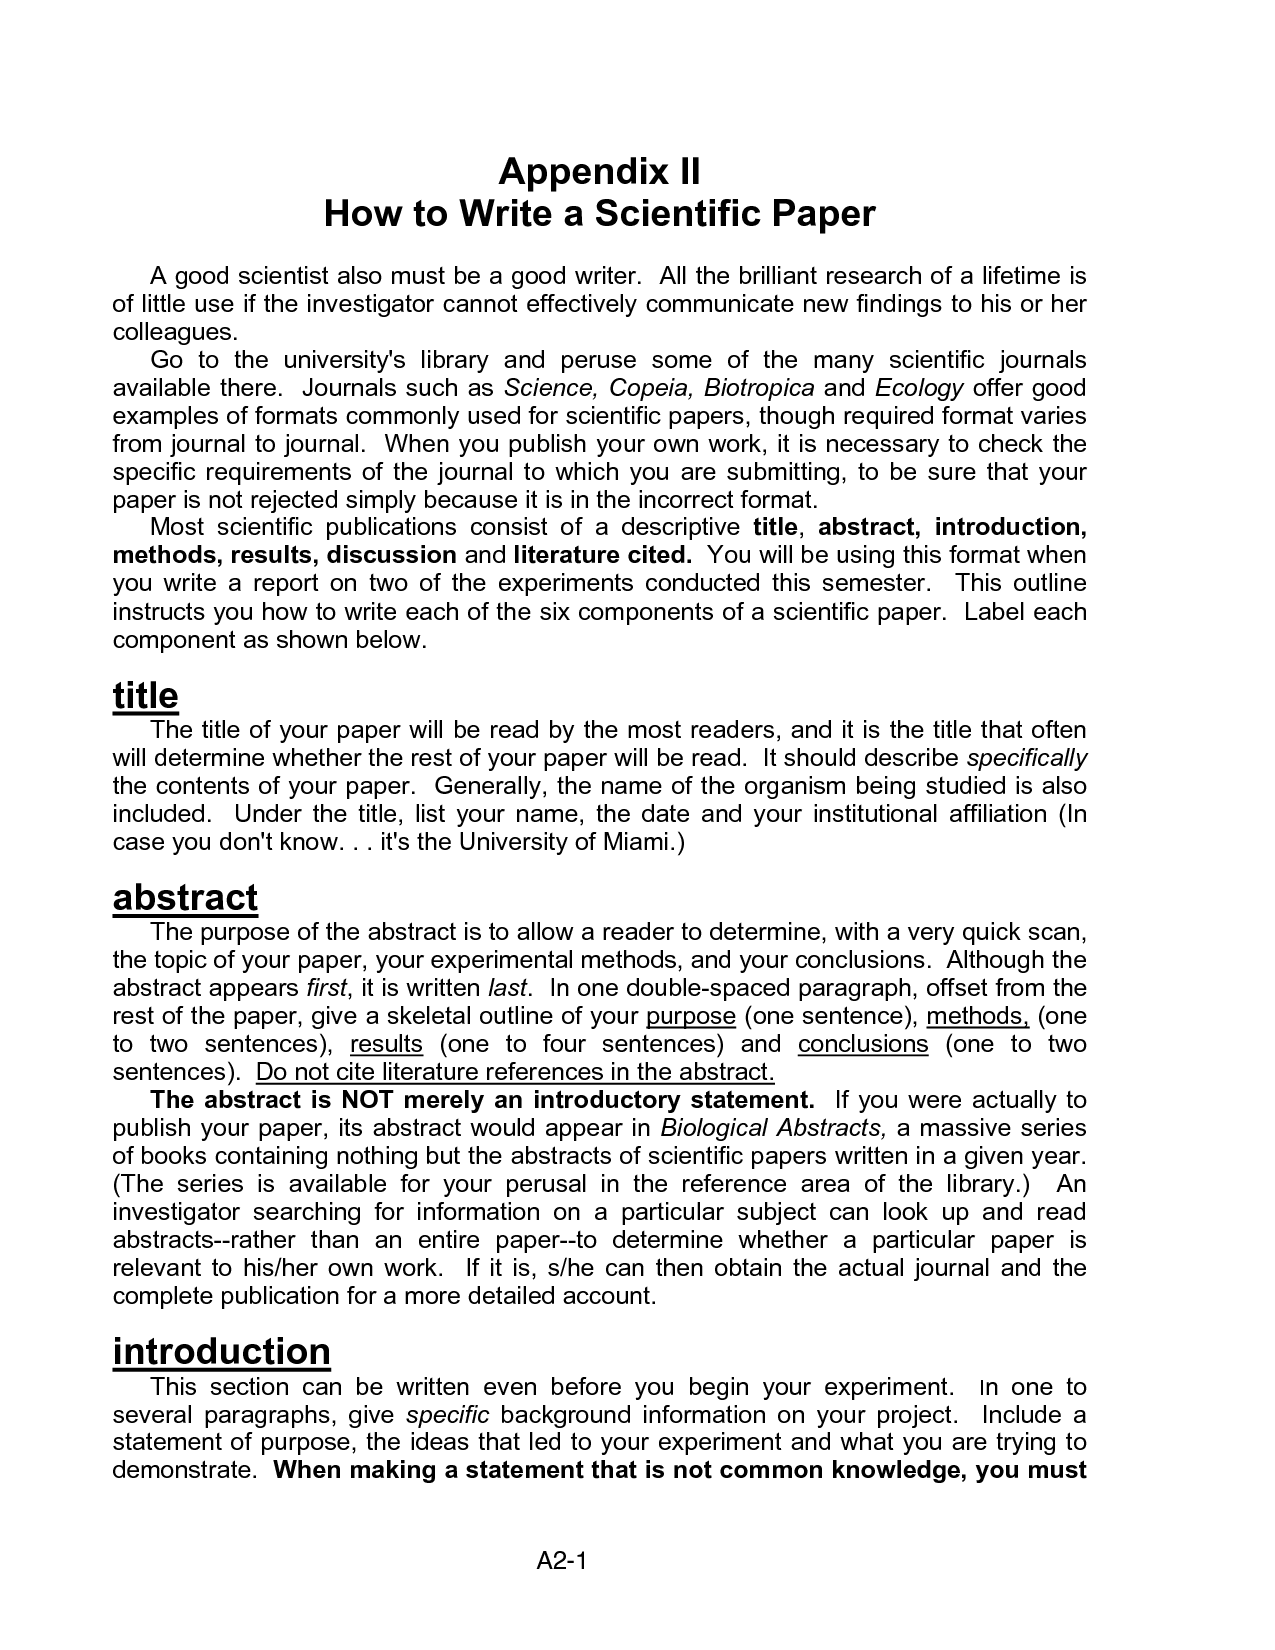 How to Write a Scientific Report - Apxer